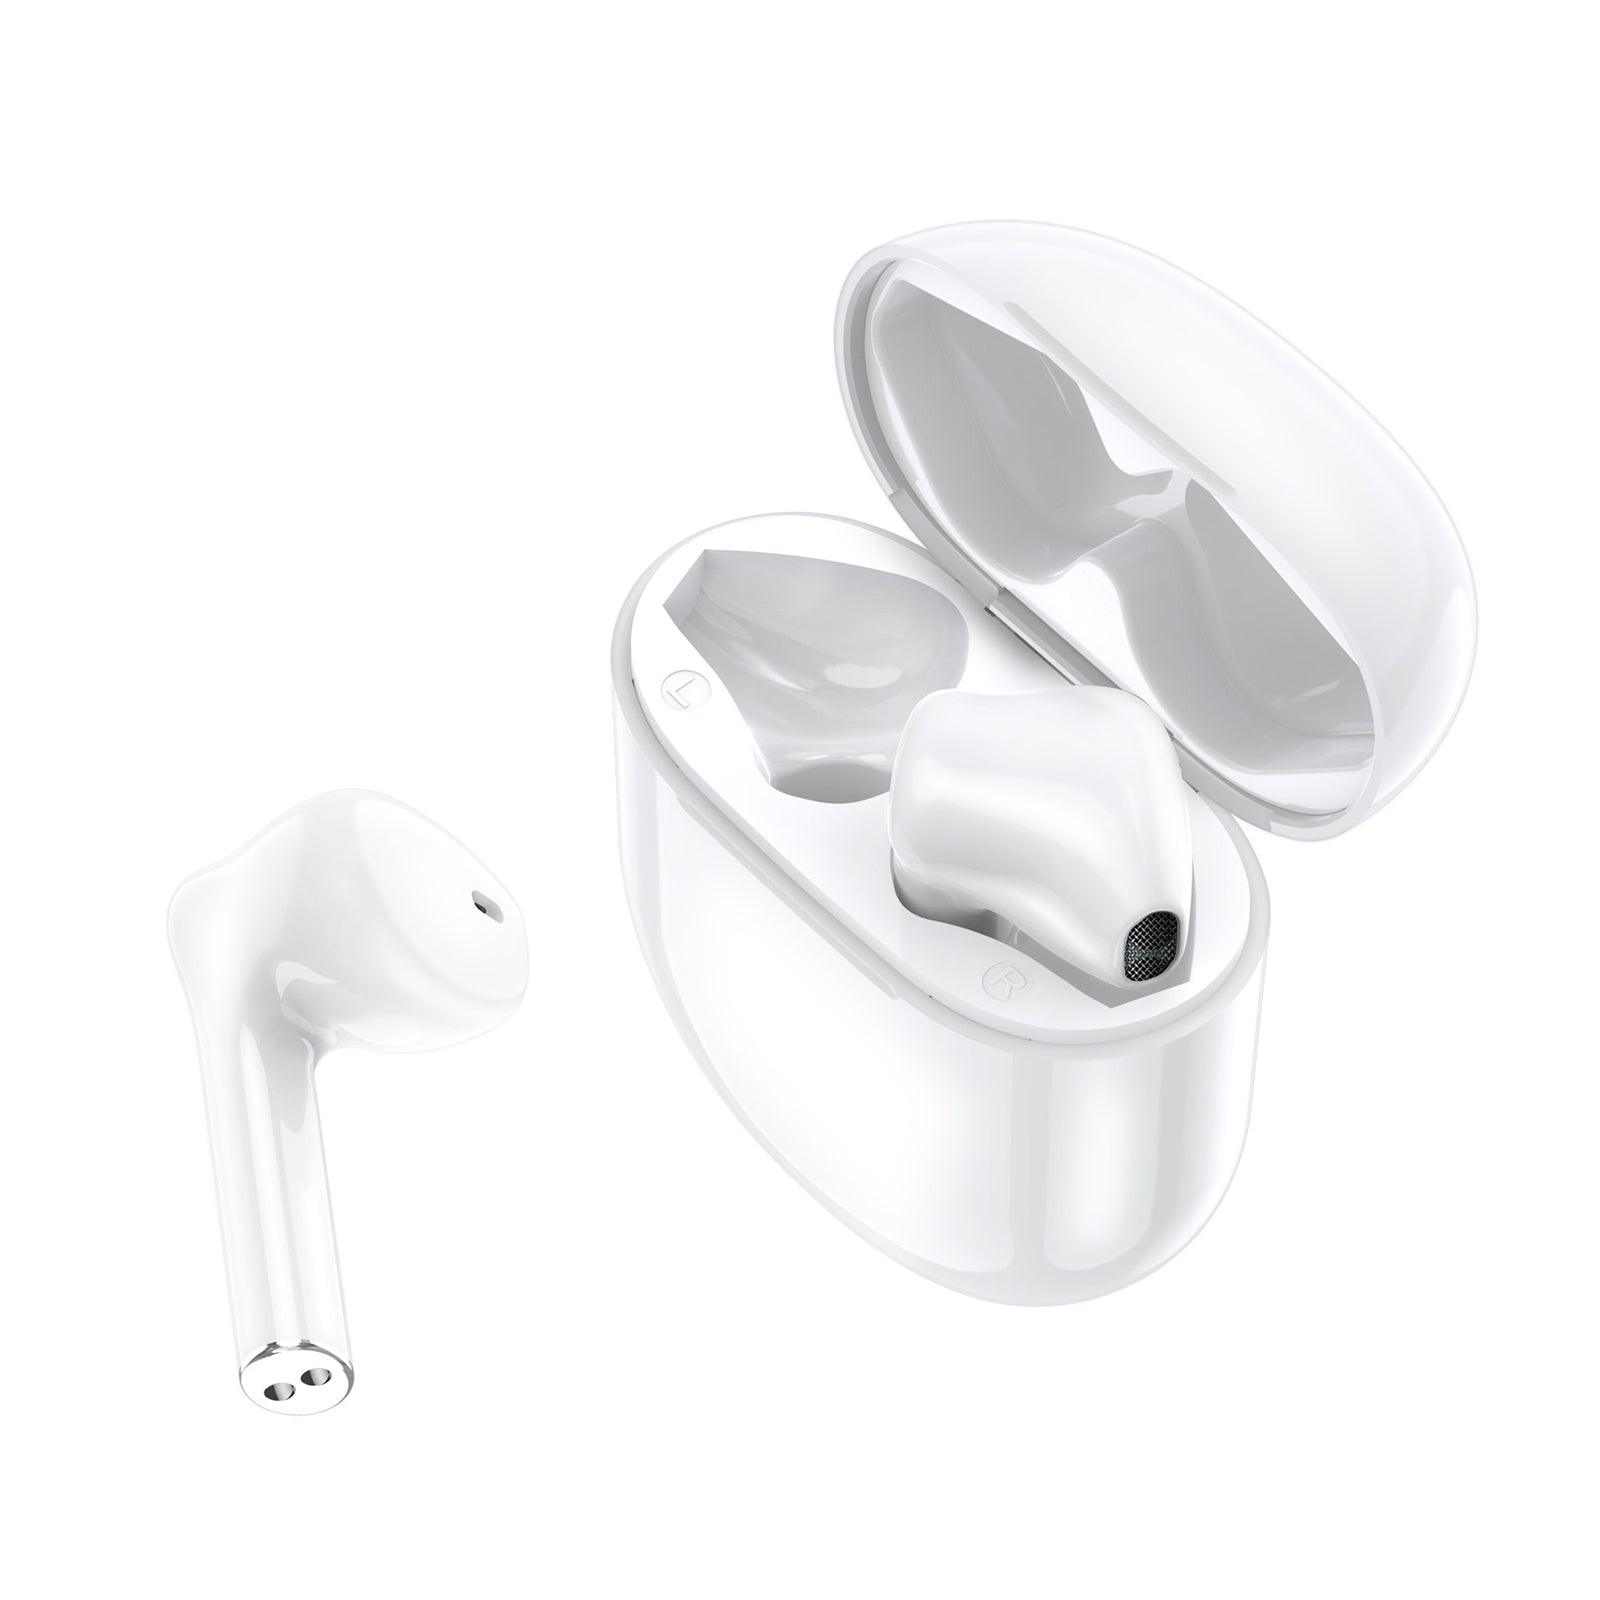 FitSmart Wireless Earbuds Earphones Bluetooth 5.0 For IOS Android In Built Mic - White